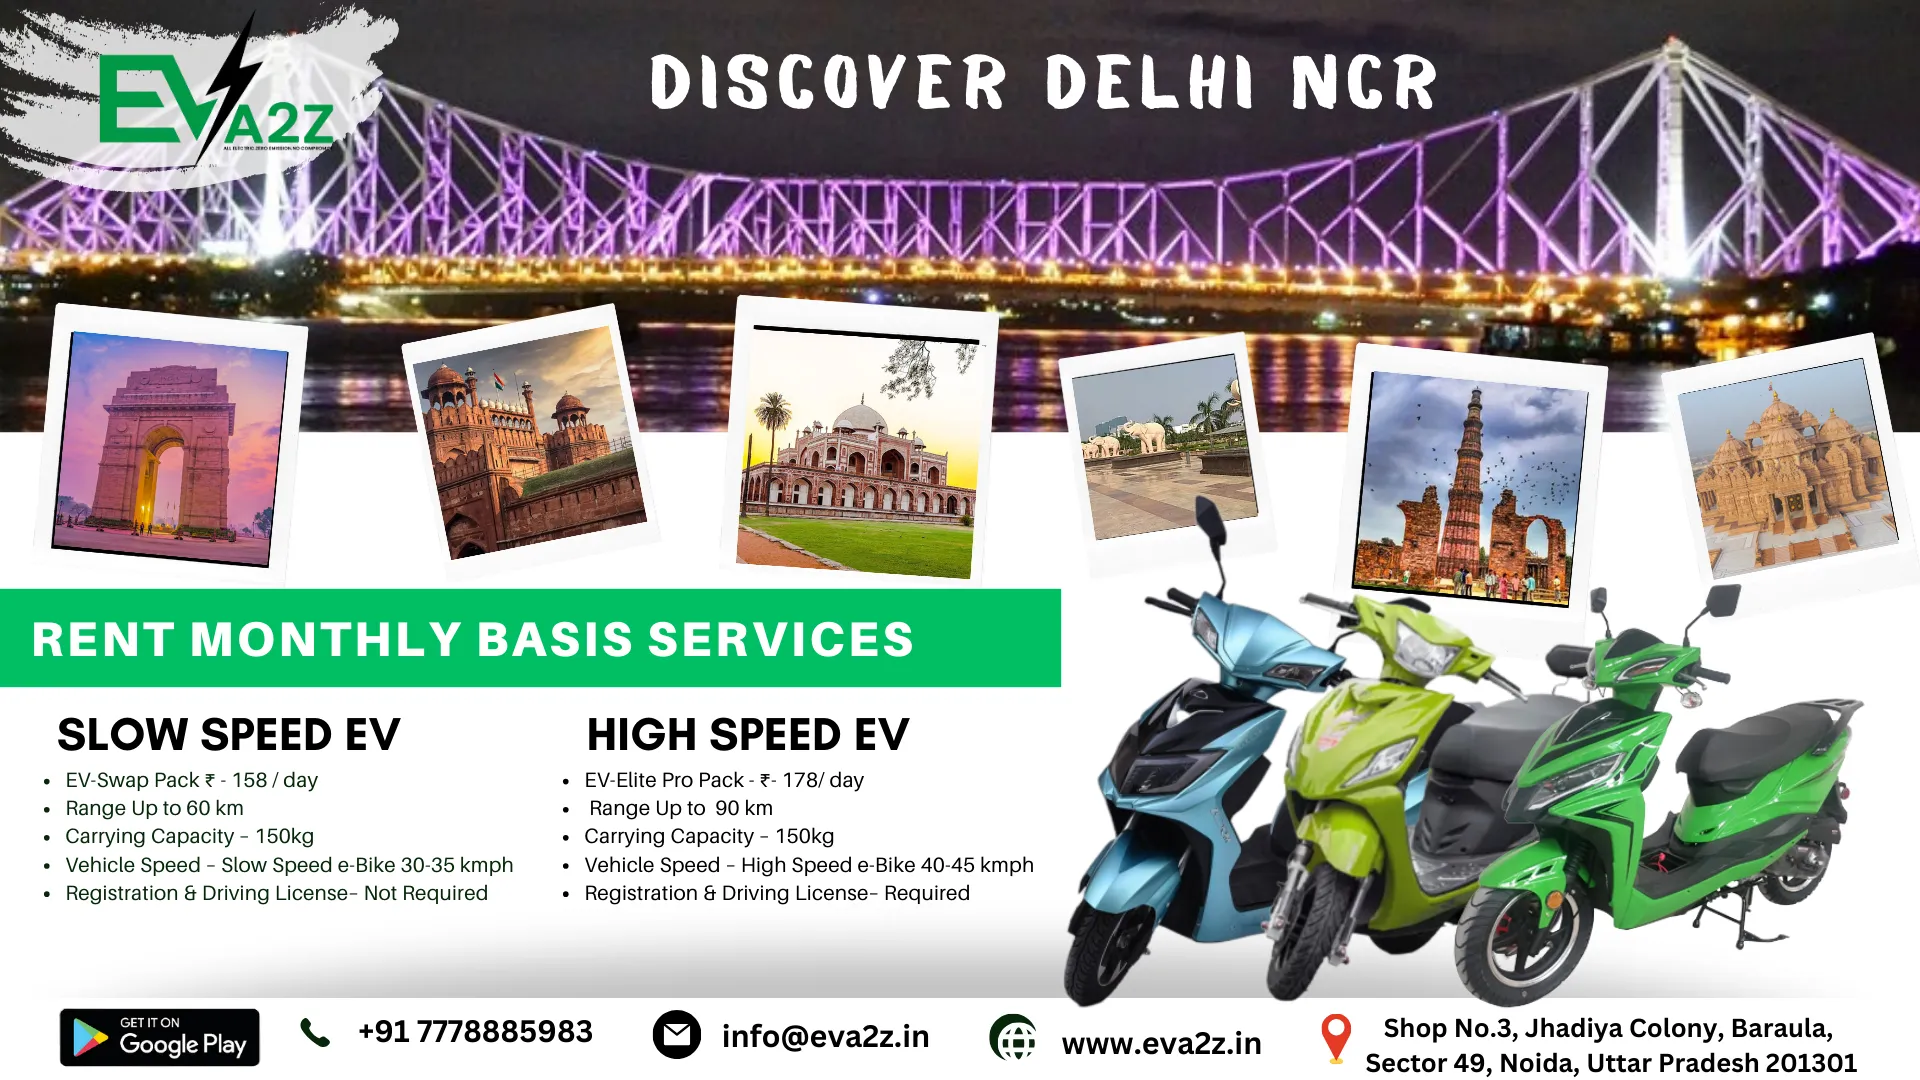 Delhi NCR with Our Scooty on Rent Monthly Basis Services